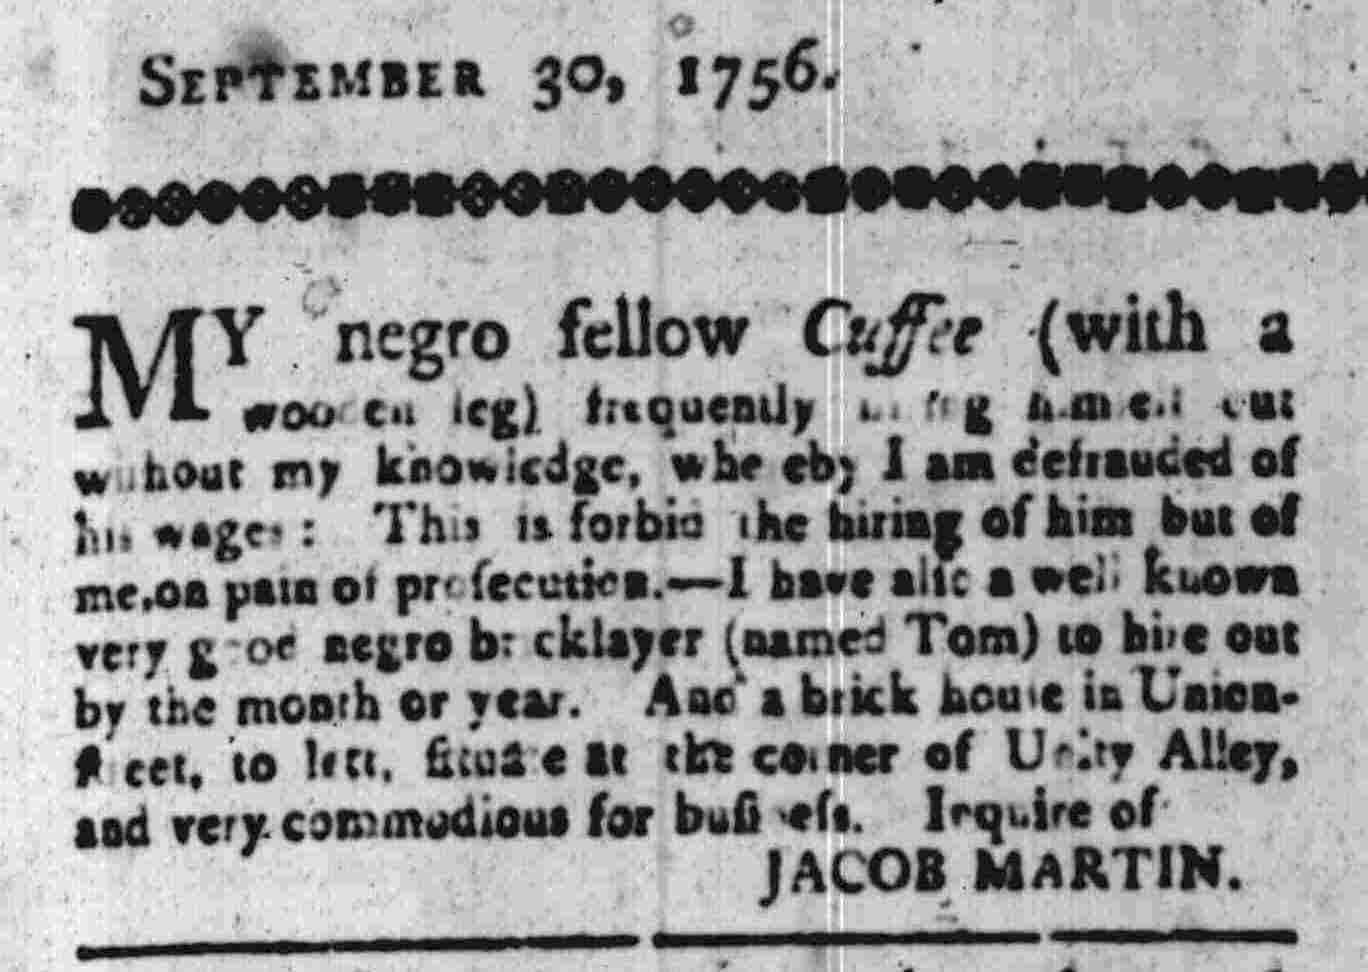 An ad about two enslaved men, Cuffee and Tom, in the Sept. 30, 1756 edition of the SC Gazette.